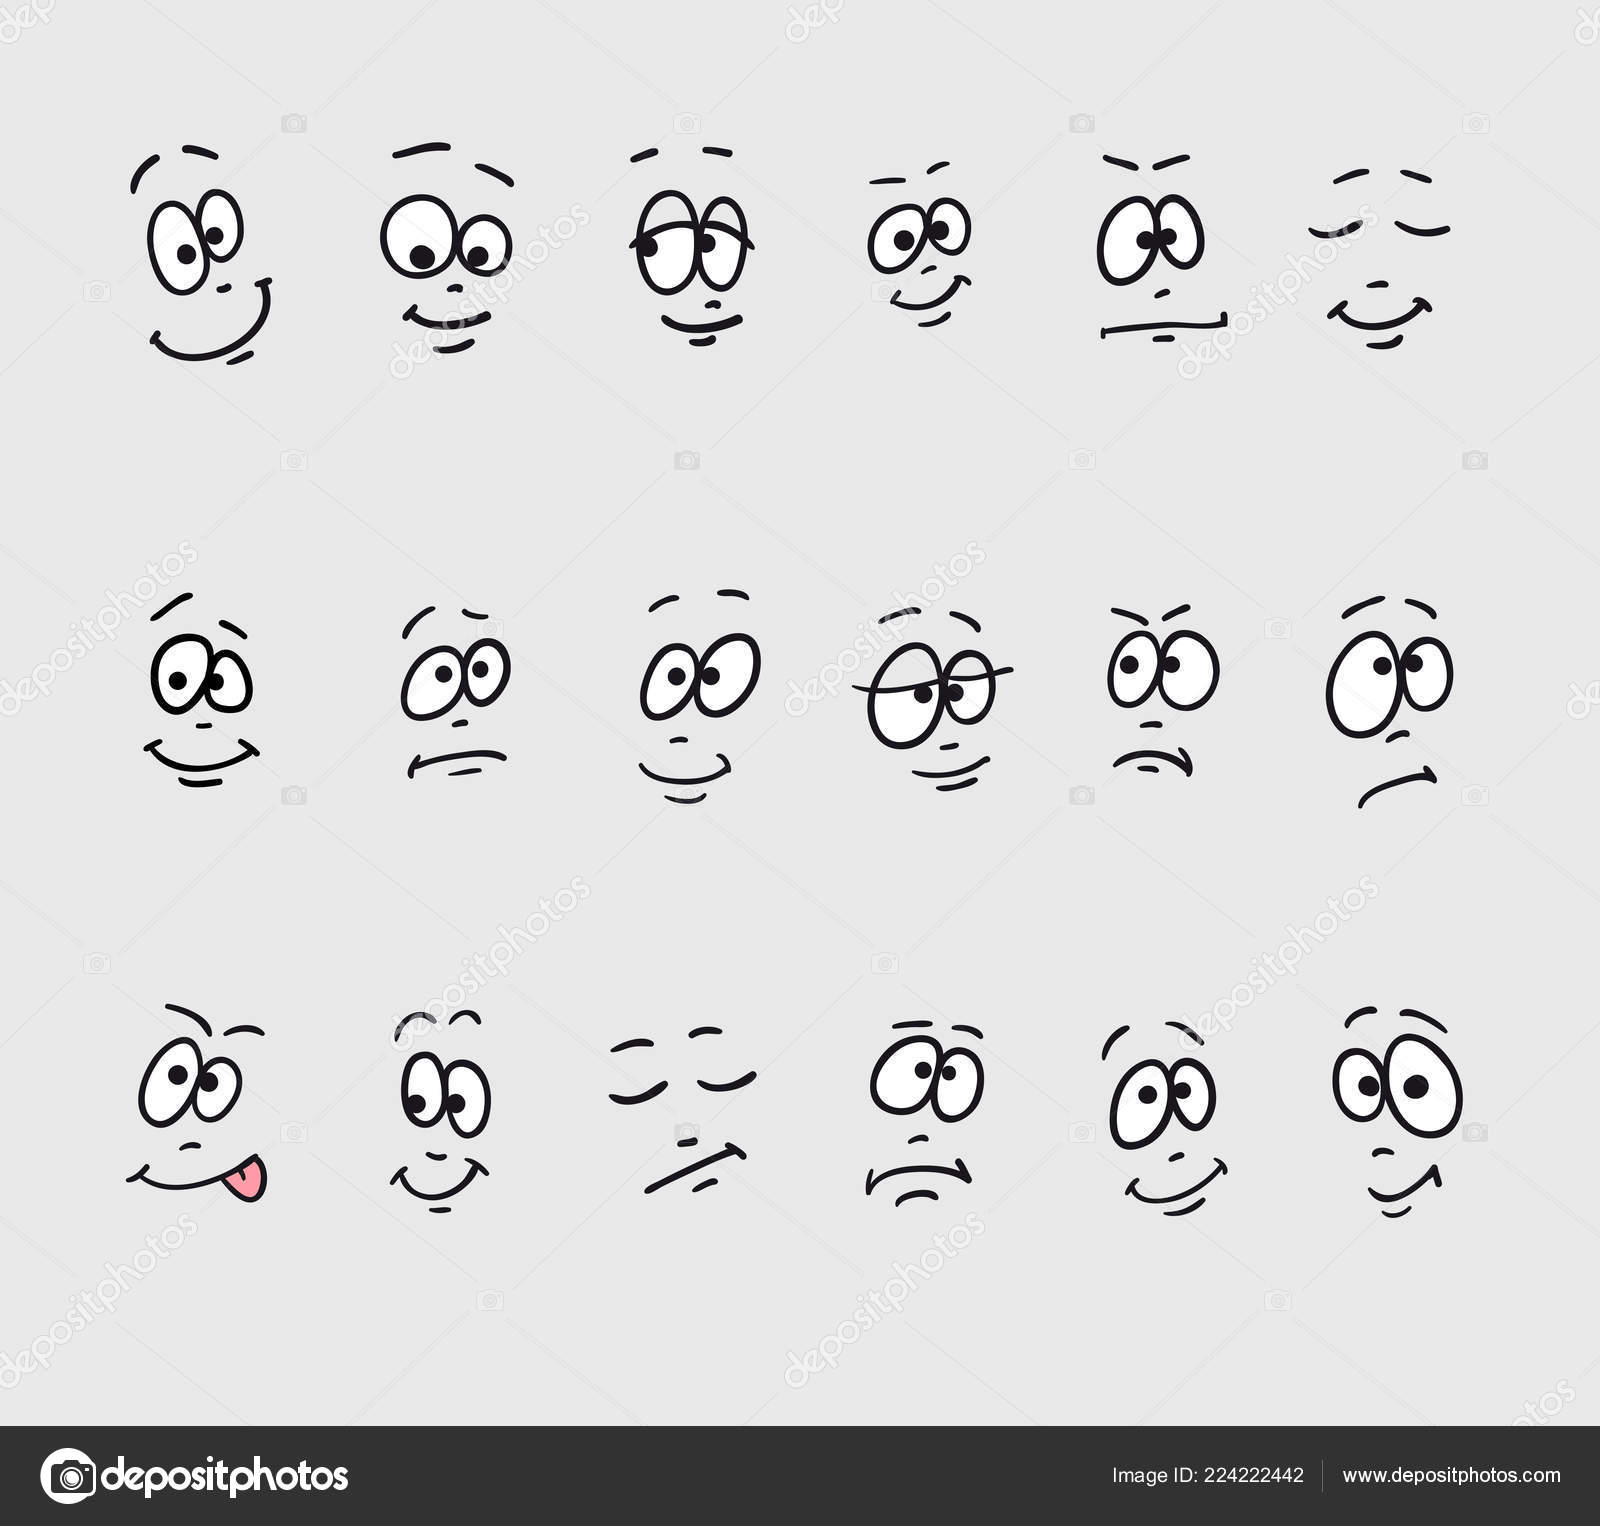 How to draw a funny face